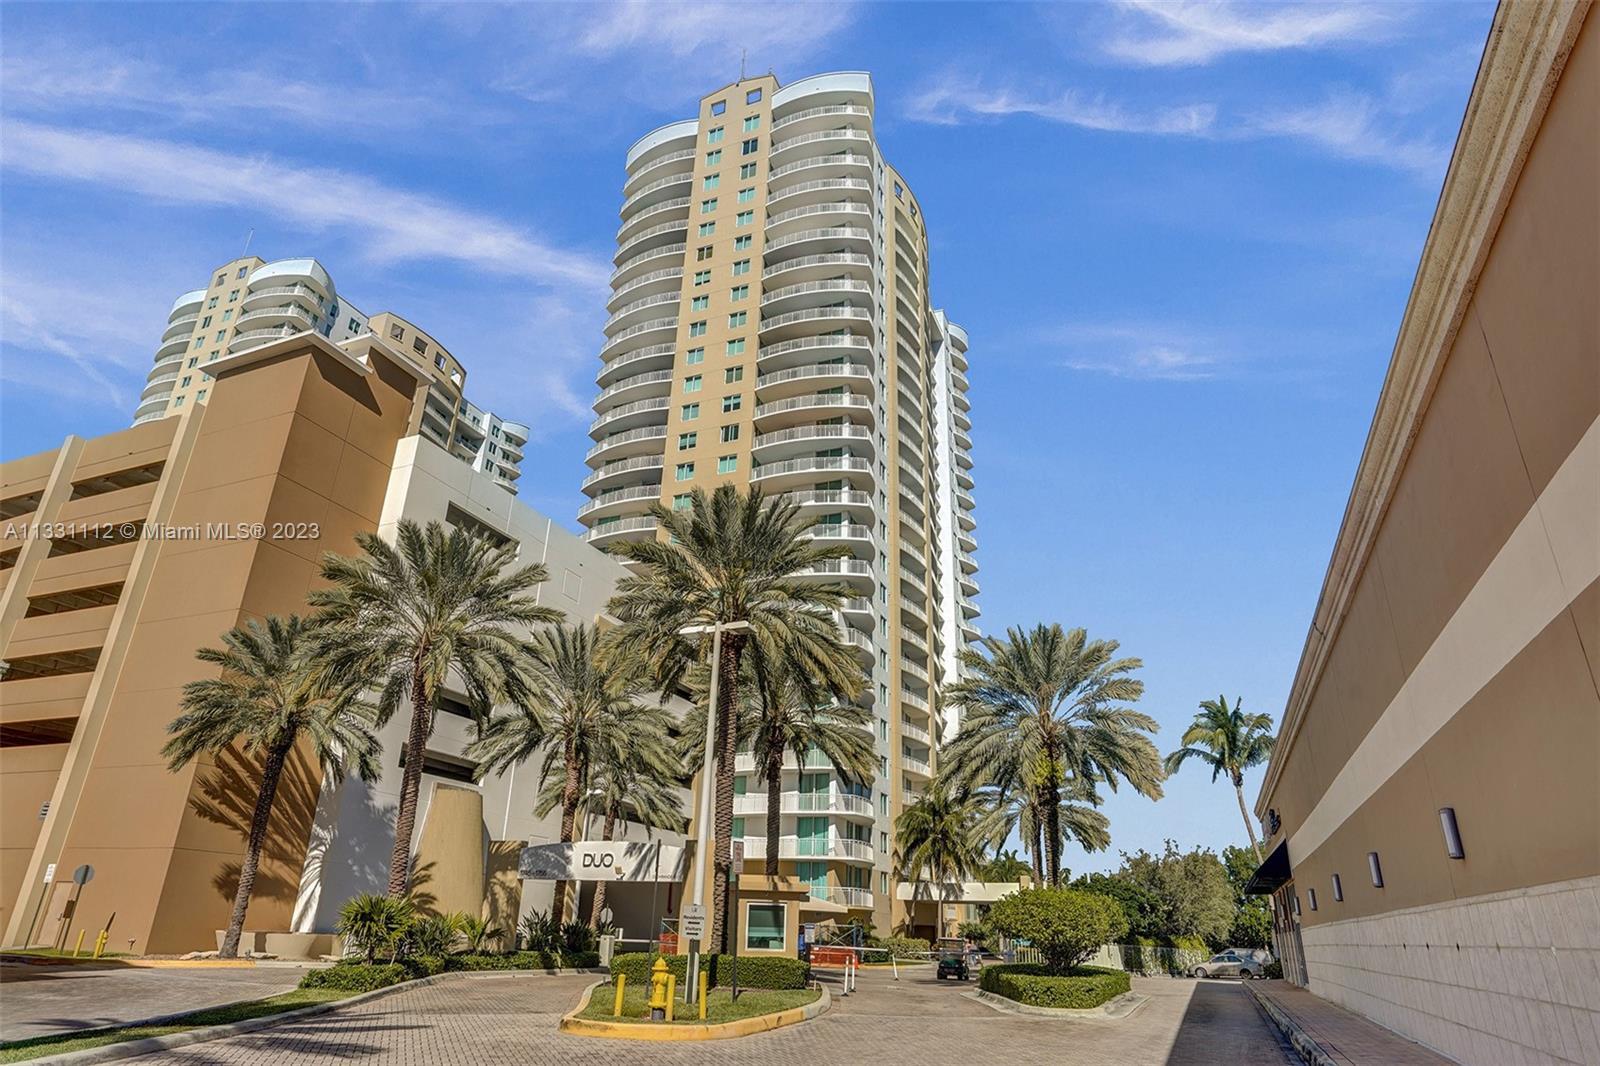 FULLY RENOVATED 3 BEDROOMS, 2 BATHROOM CONDO LOCATED IN PRIME HALLANDALE BEACH.
THE UNIT HAVE BEAUT